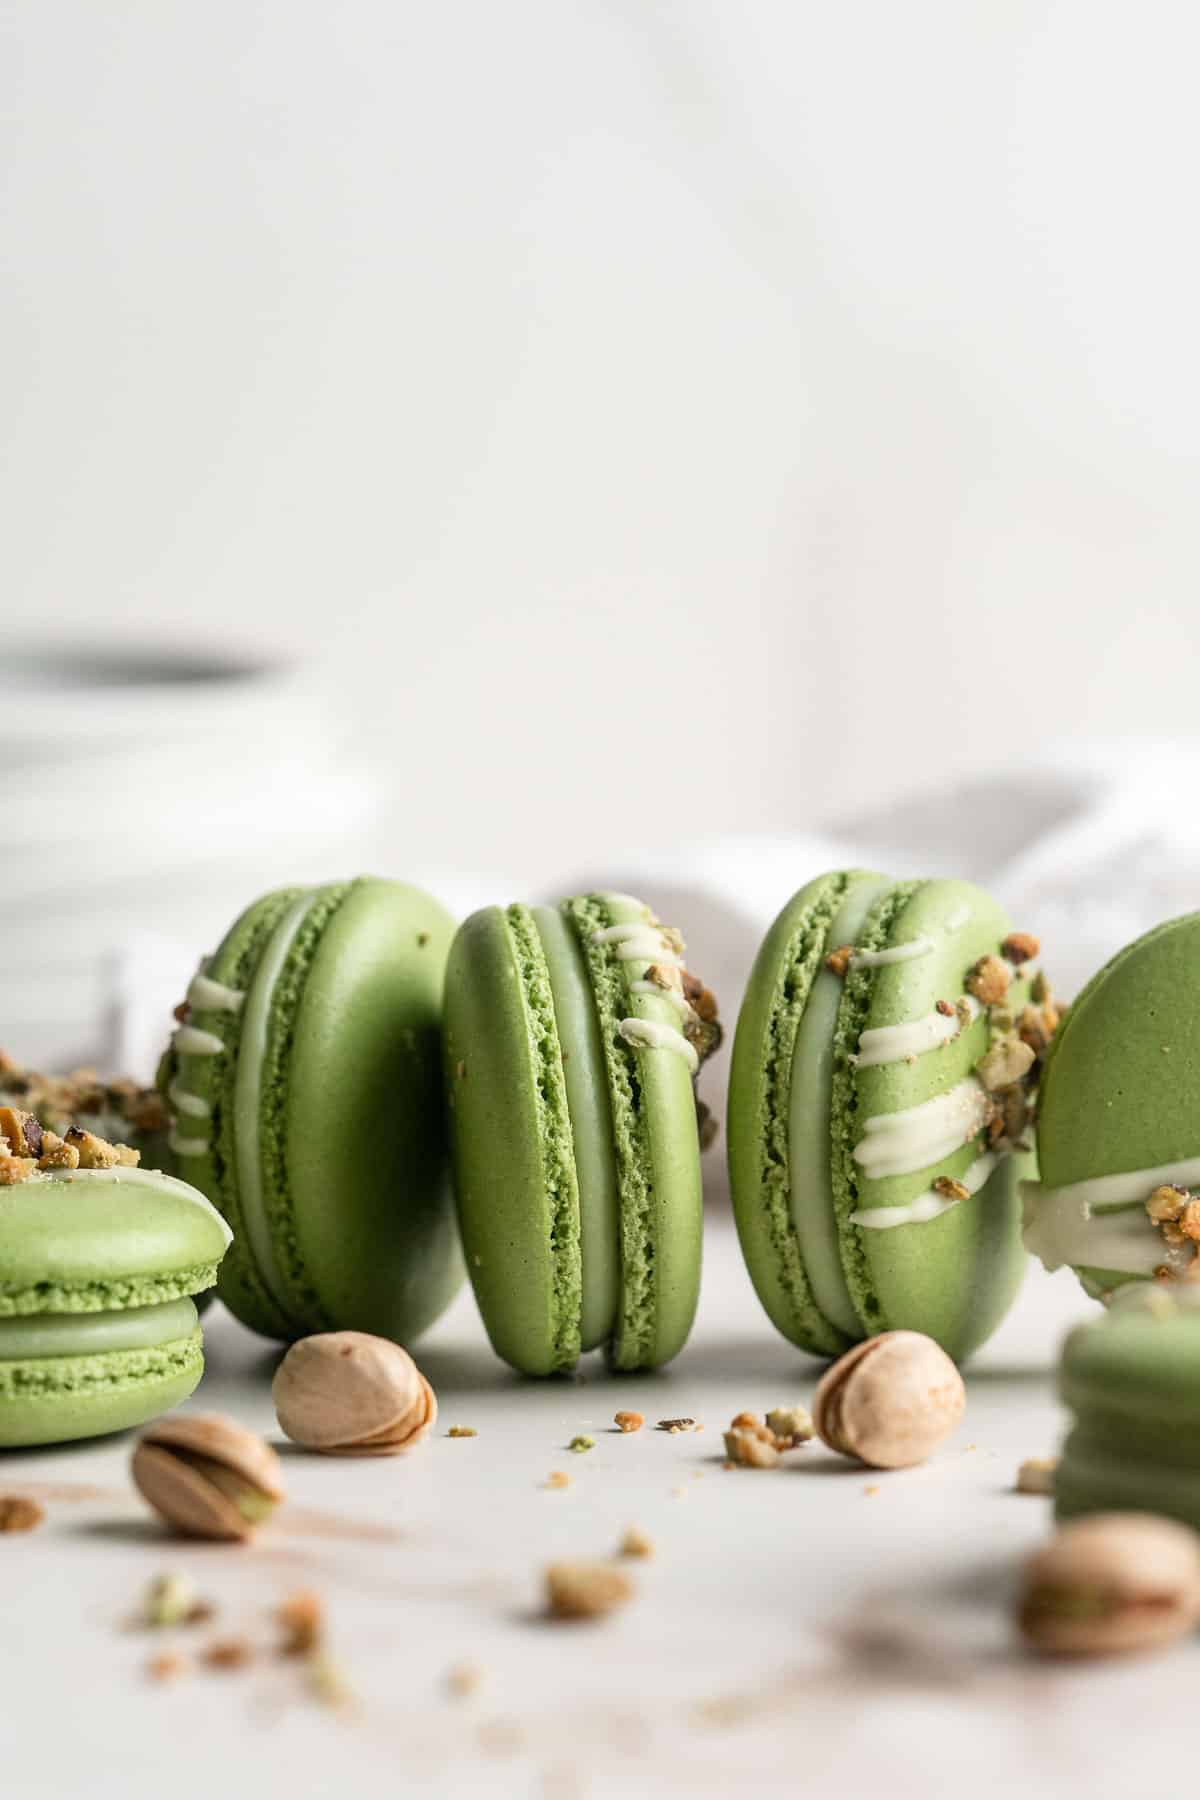 Pistachio Macarons are delicate, chewy, melt-in-your-mouth cookies filled with pistachio white chocolate ganache filling and chopped pistachios on top. | aheadofthyme.com